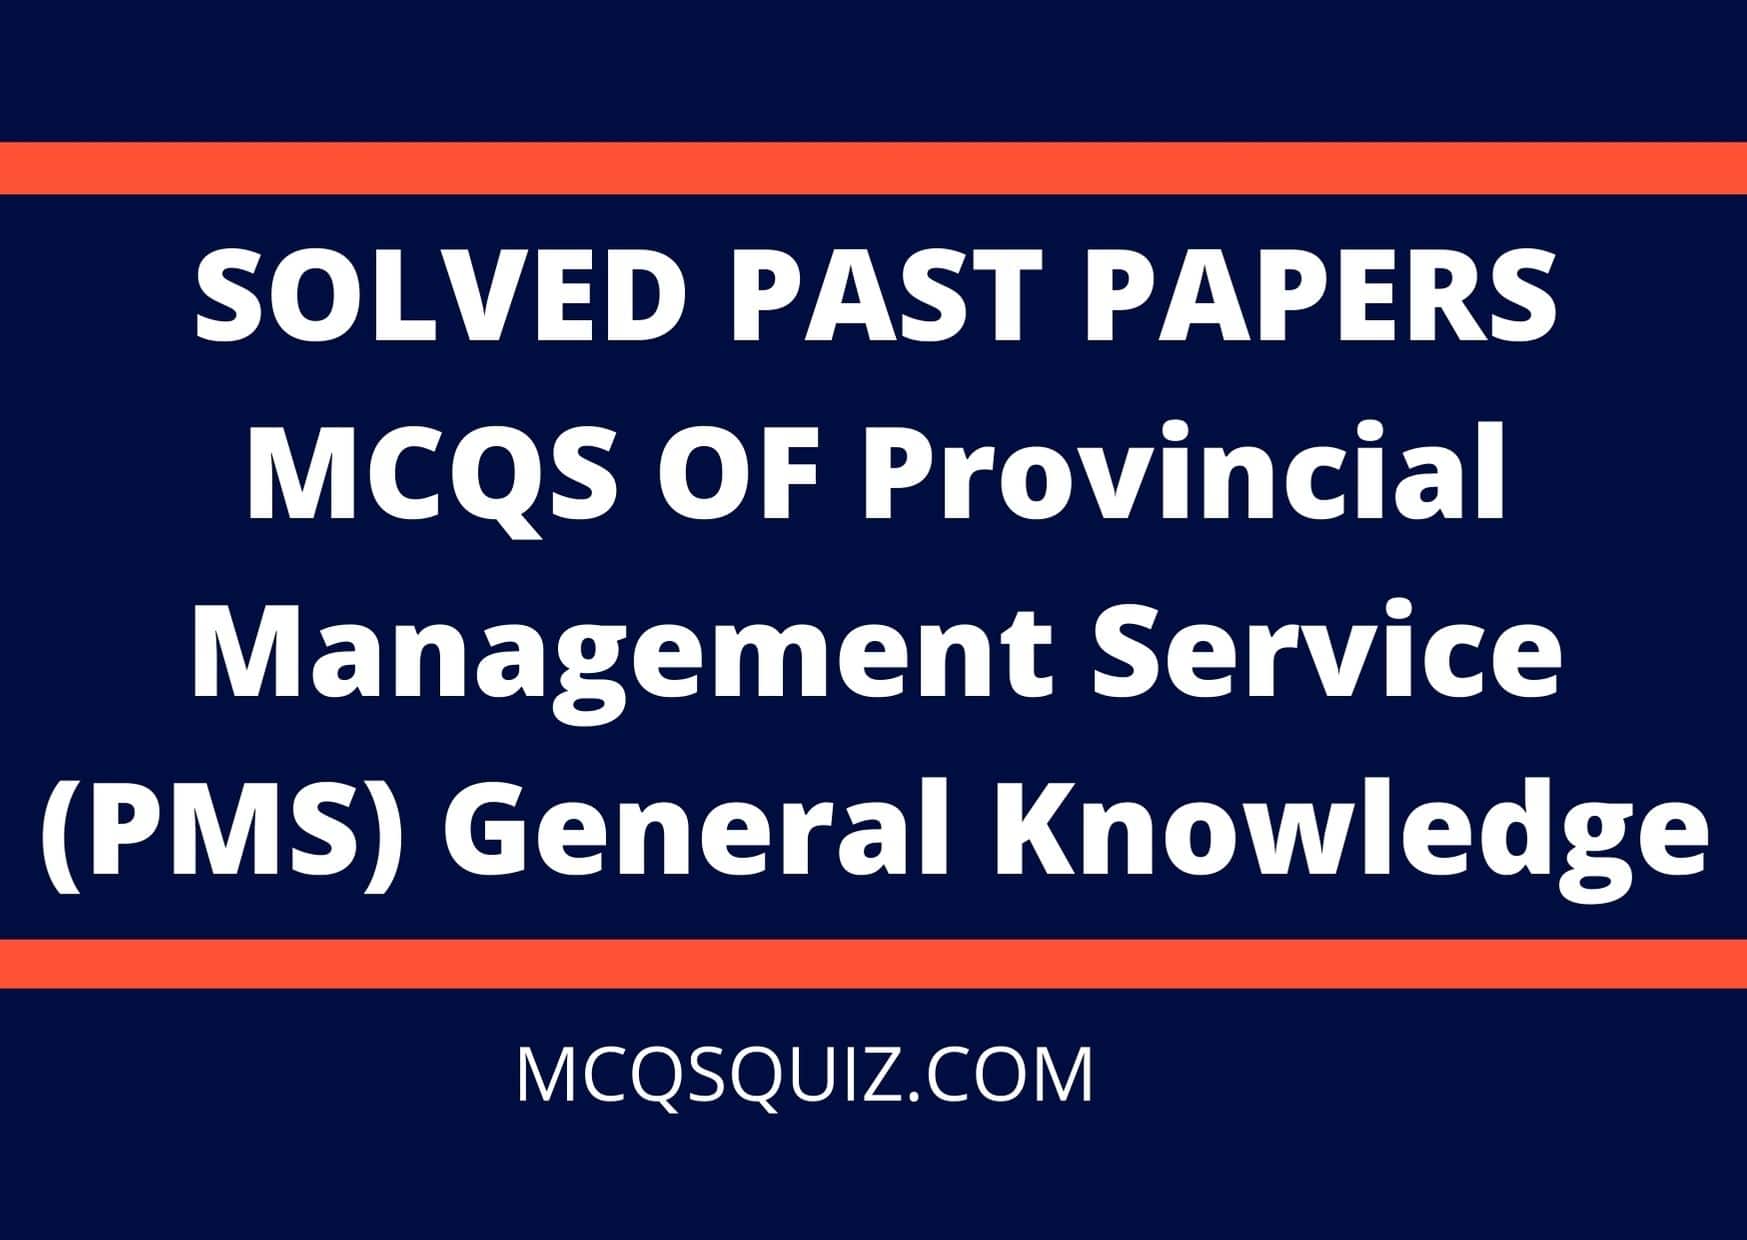 Solved Past Papers Mcqs of Provincial Management Service (PMS) General Knowledge